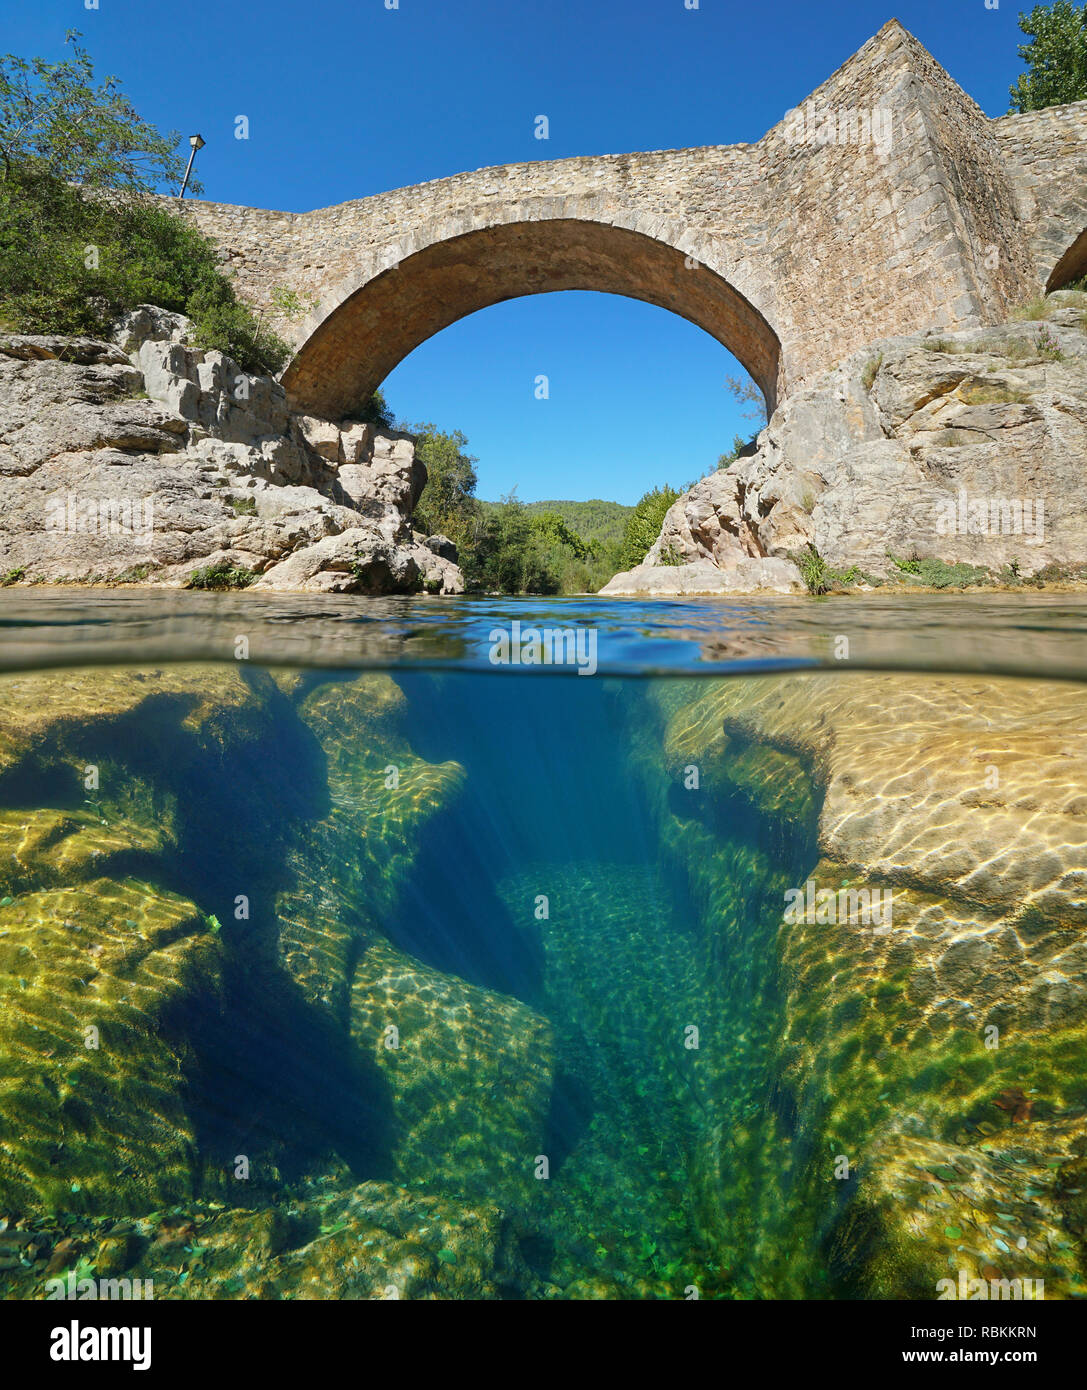 River with an old stone bridge and eroded rocks underwater, split view half above and below water surface, Sant Llorenc de la Muga, Catalonia, Spain Stock Photo